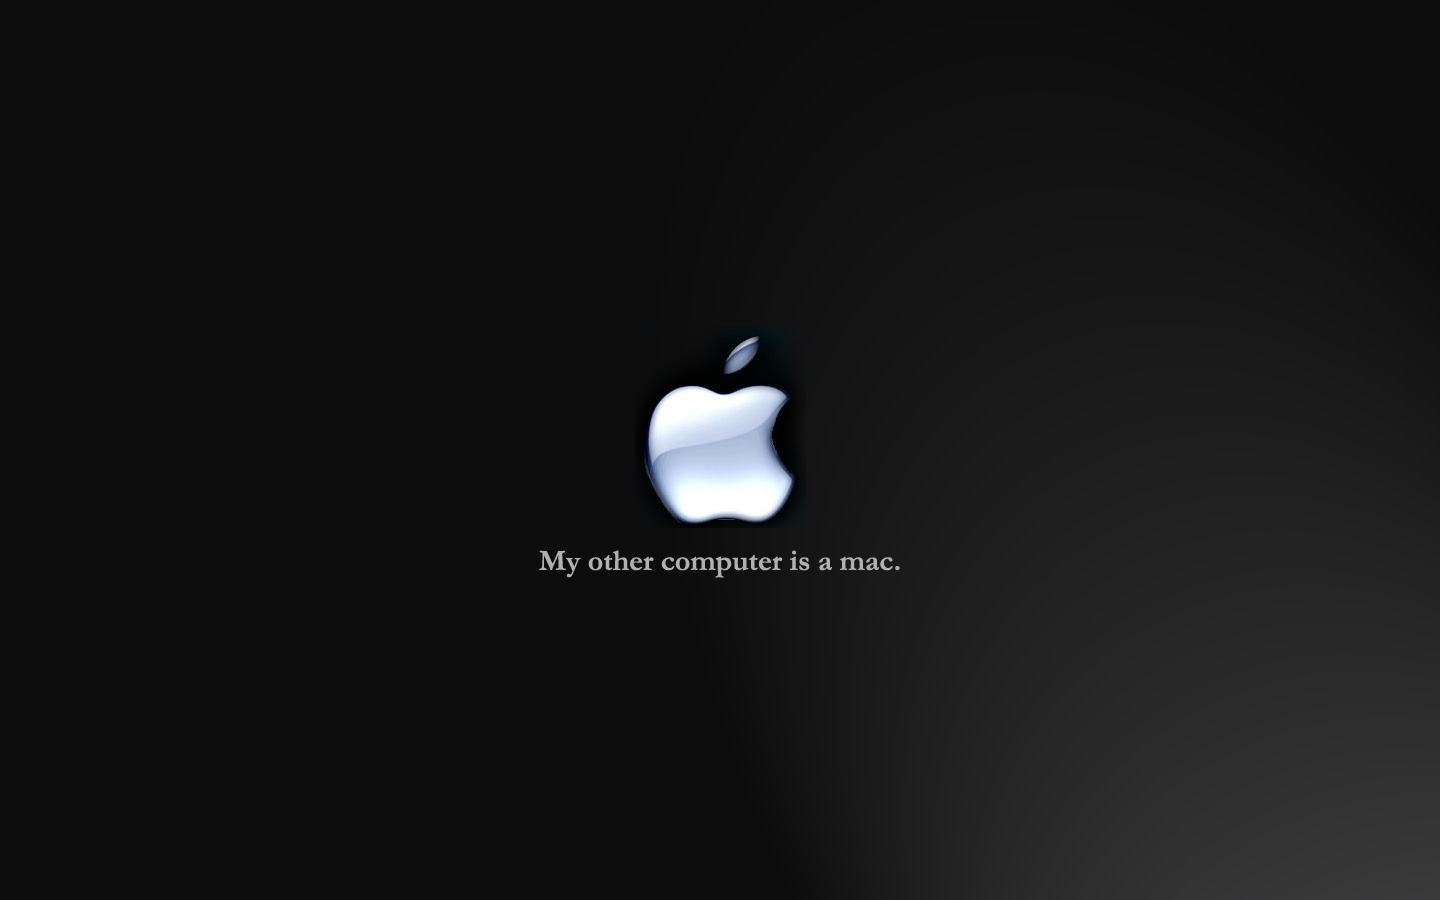 My other computer is a mac.